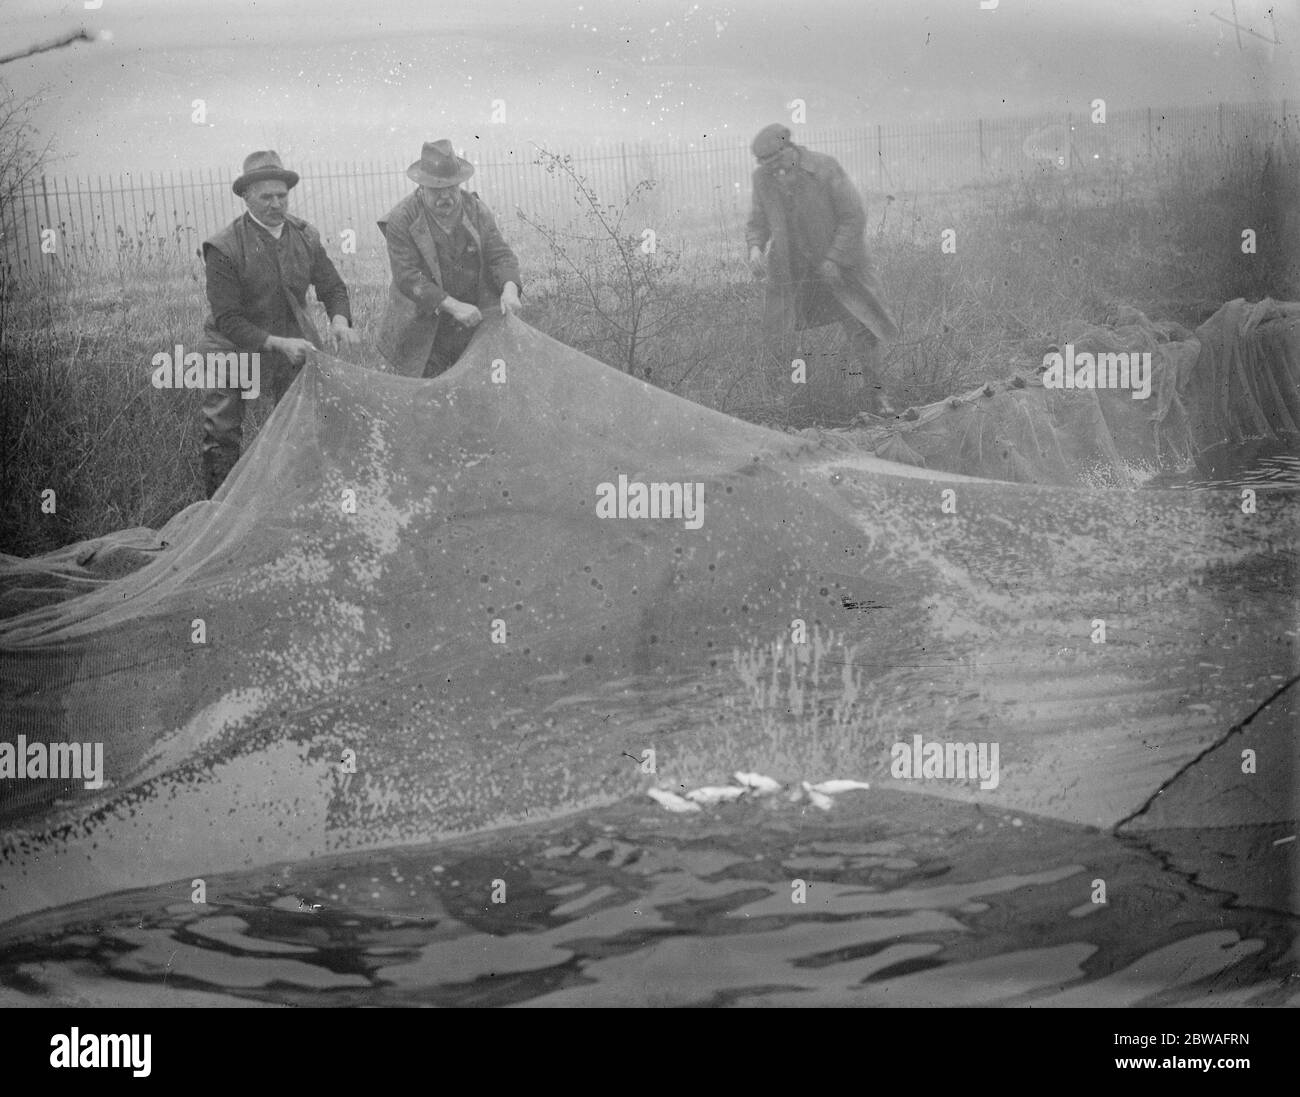 Re stocking the Thames . The Thames angling preservation society are netting fish by the hundreds from the Metropolitan Water Board aqueduct near Staines to re stock the waters of the Thames for the benefit of anglers . Netting the fish , mostly roach , and placing them in the Thames near Staines bridge , 20 December 1933 Stock Photo